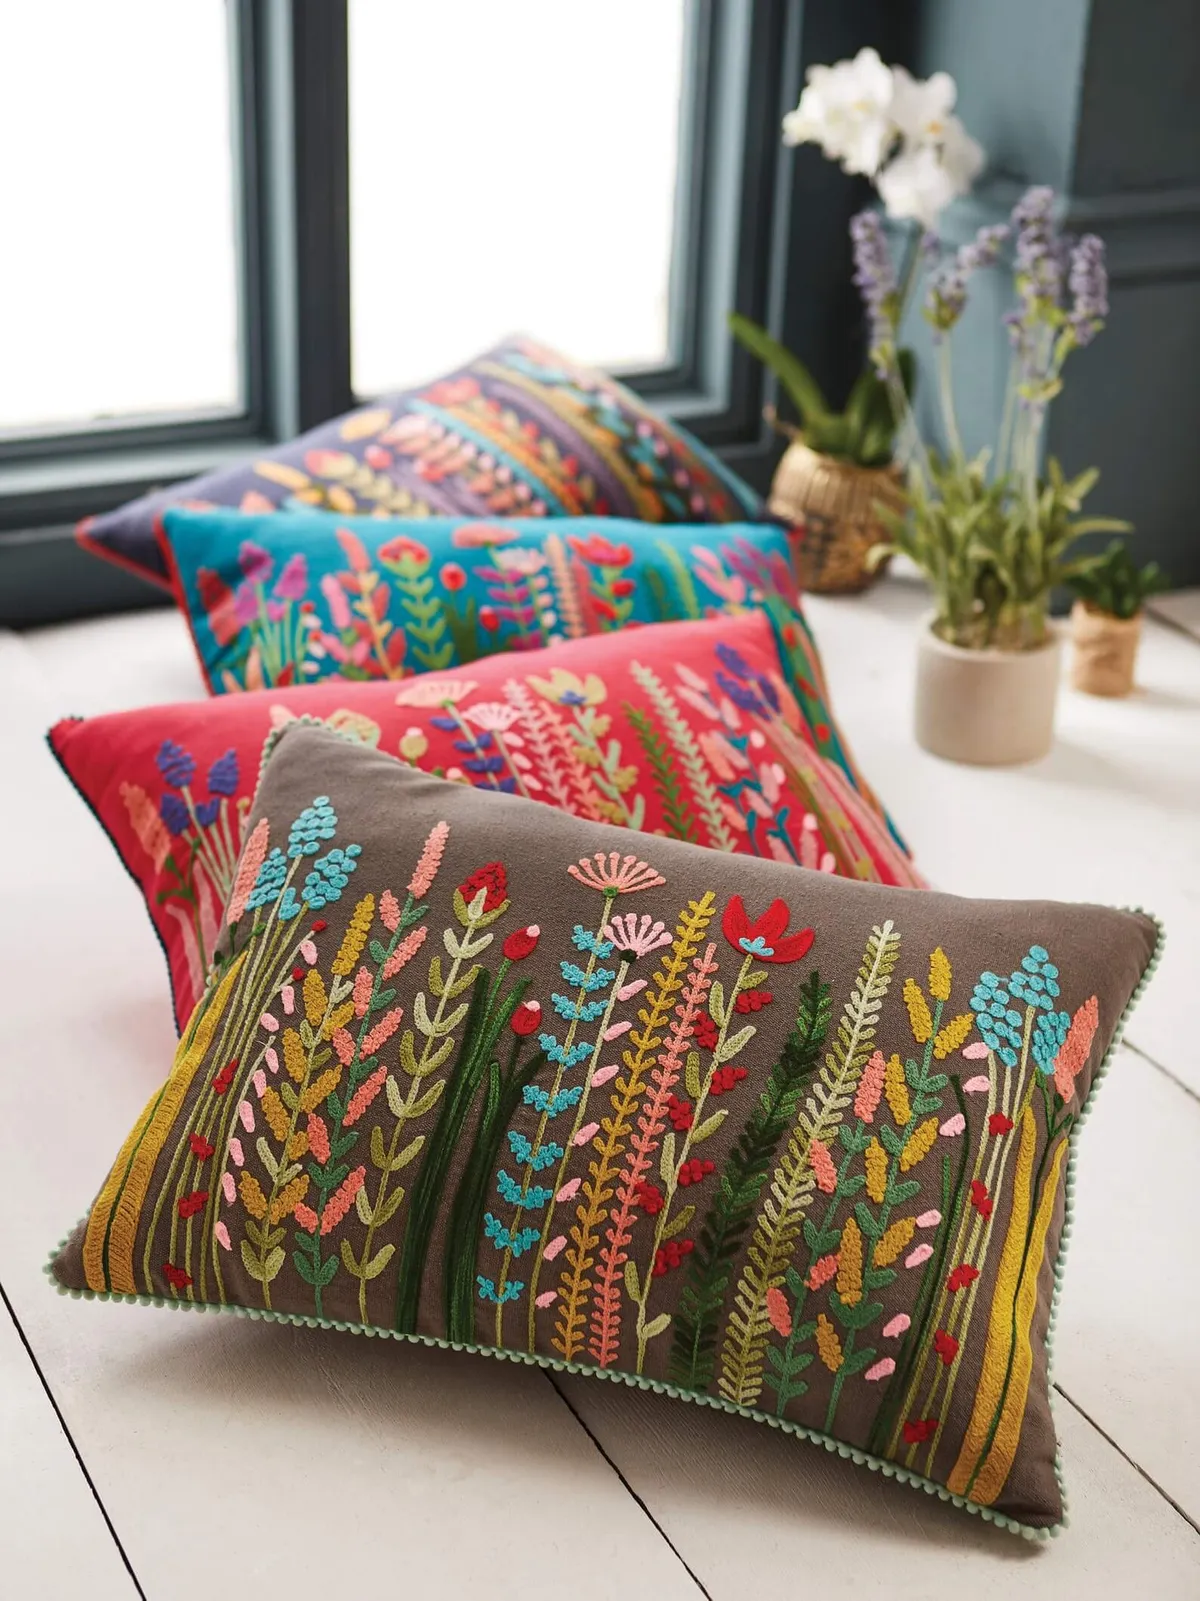 embroidered cushion with wildflower pattern